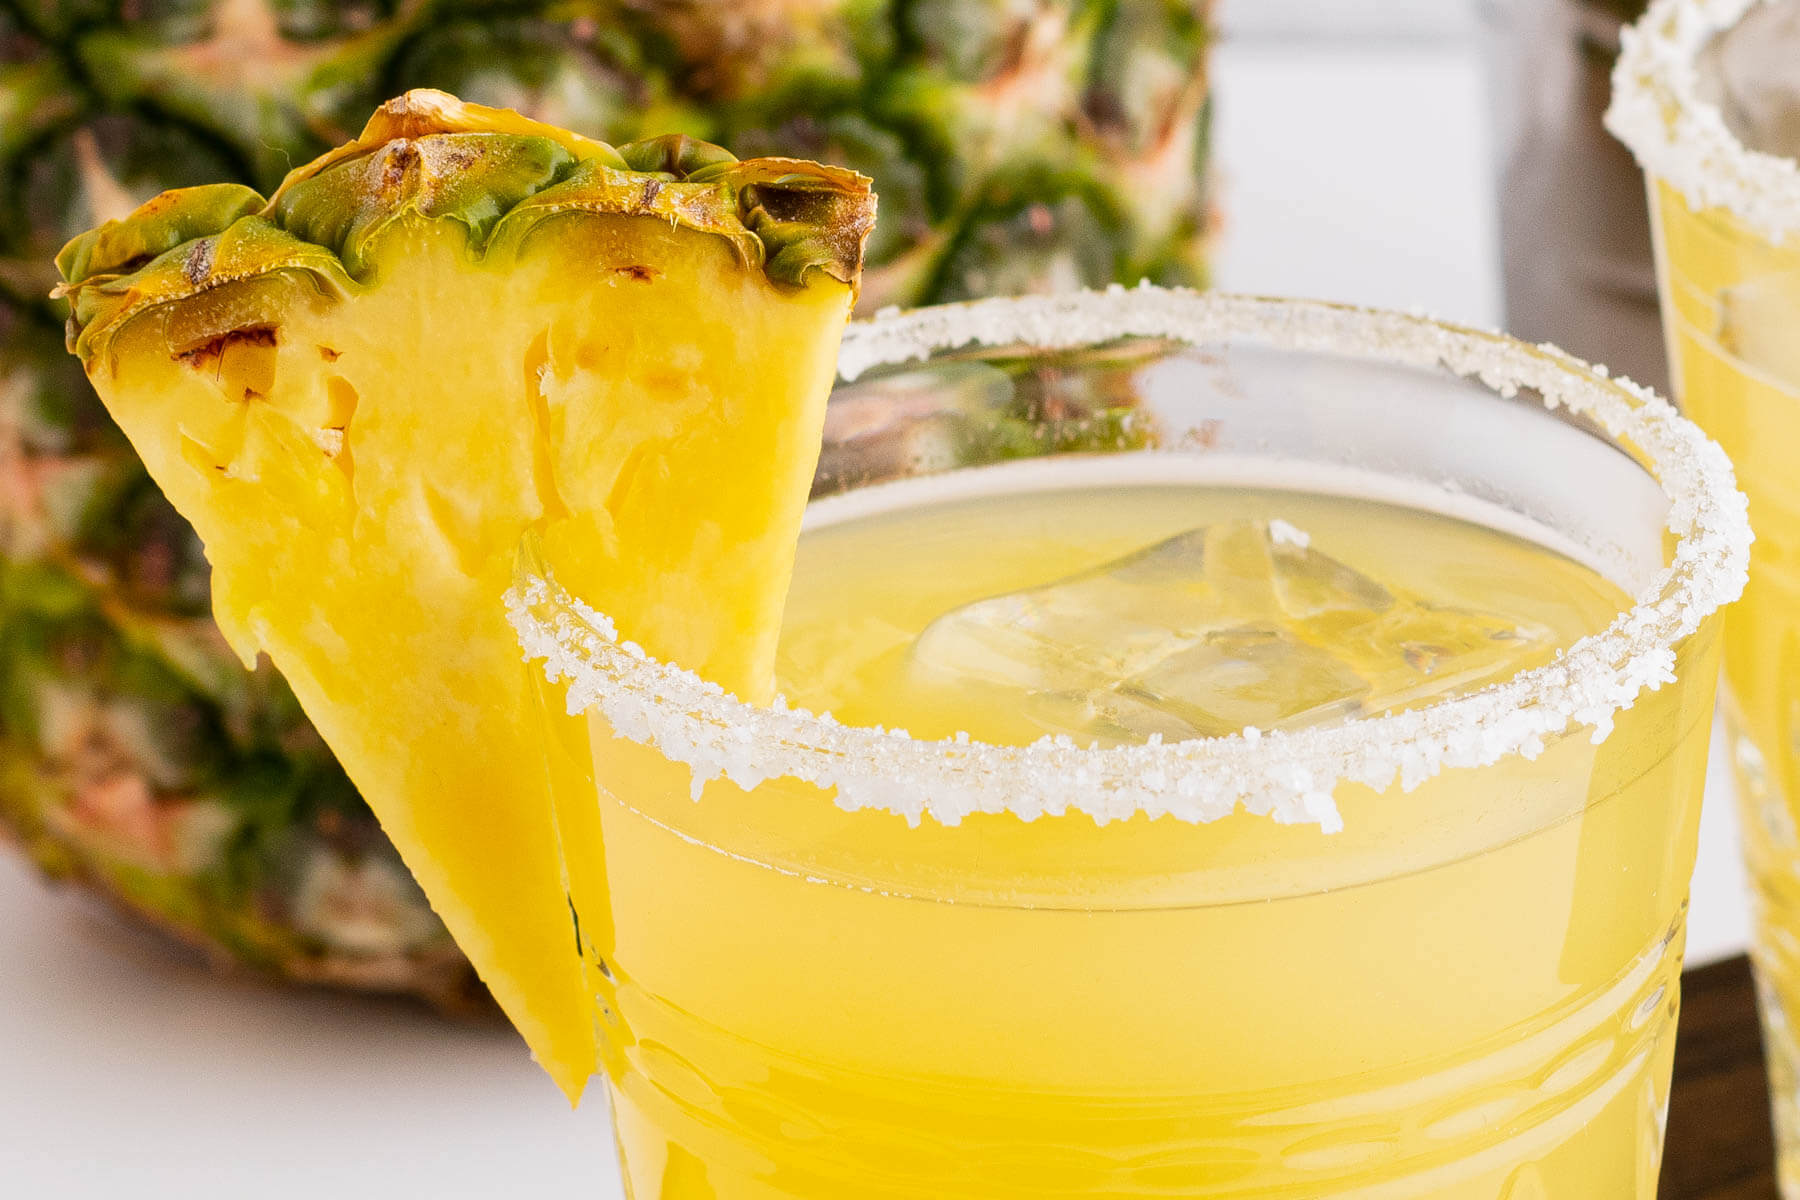 Close up of a margarita in a glass with rimmer and pineapple garnish.